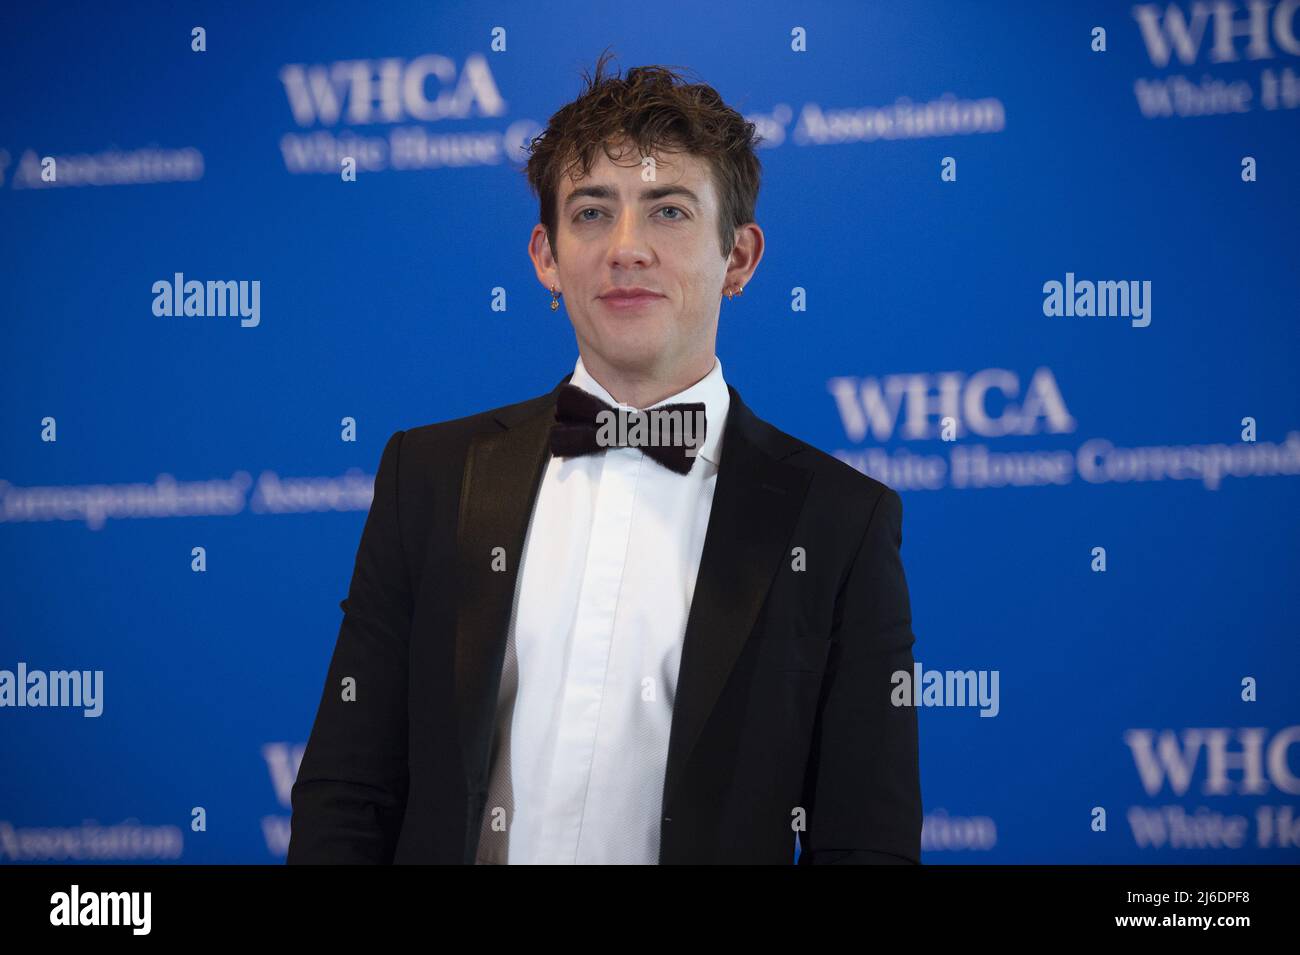 Actor Kevin McHale arrives at the 2022 White House Correspondents' Association Dinner at the Washington Hilton in Washington, DC on Saturday, April 30, 2022. The dinner is back this year for the first time since 2019. Photo by Bonnie Cash/UPI.... . Stock Photo